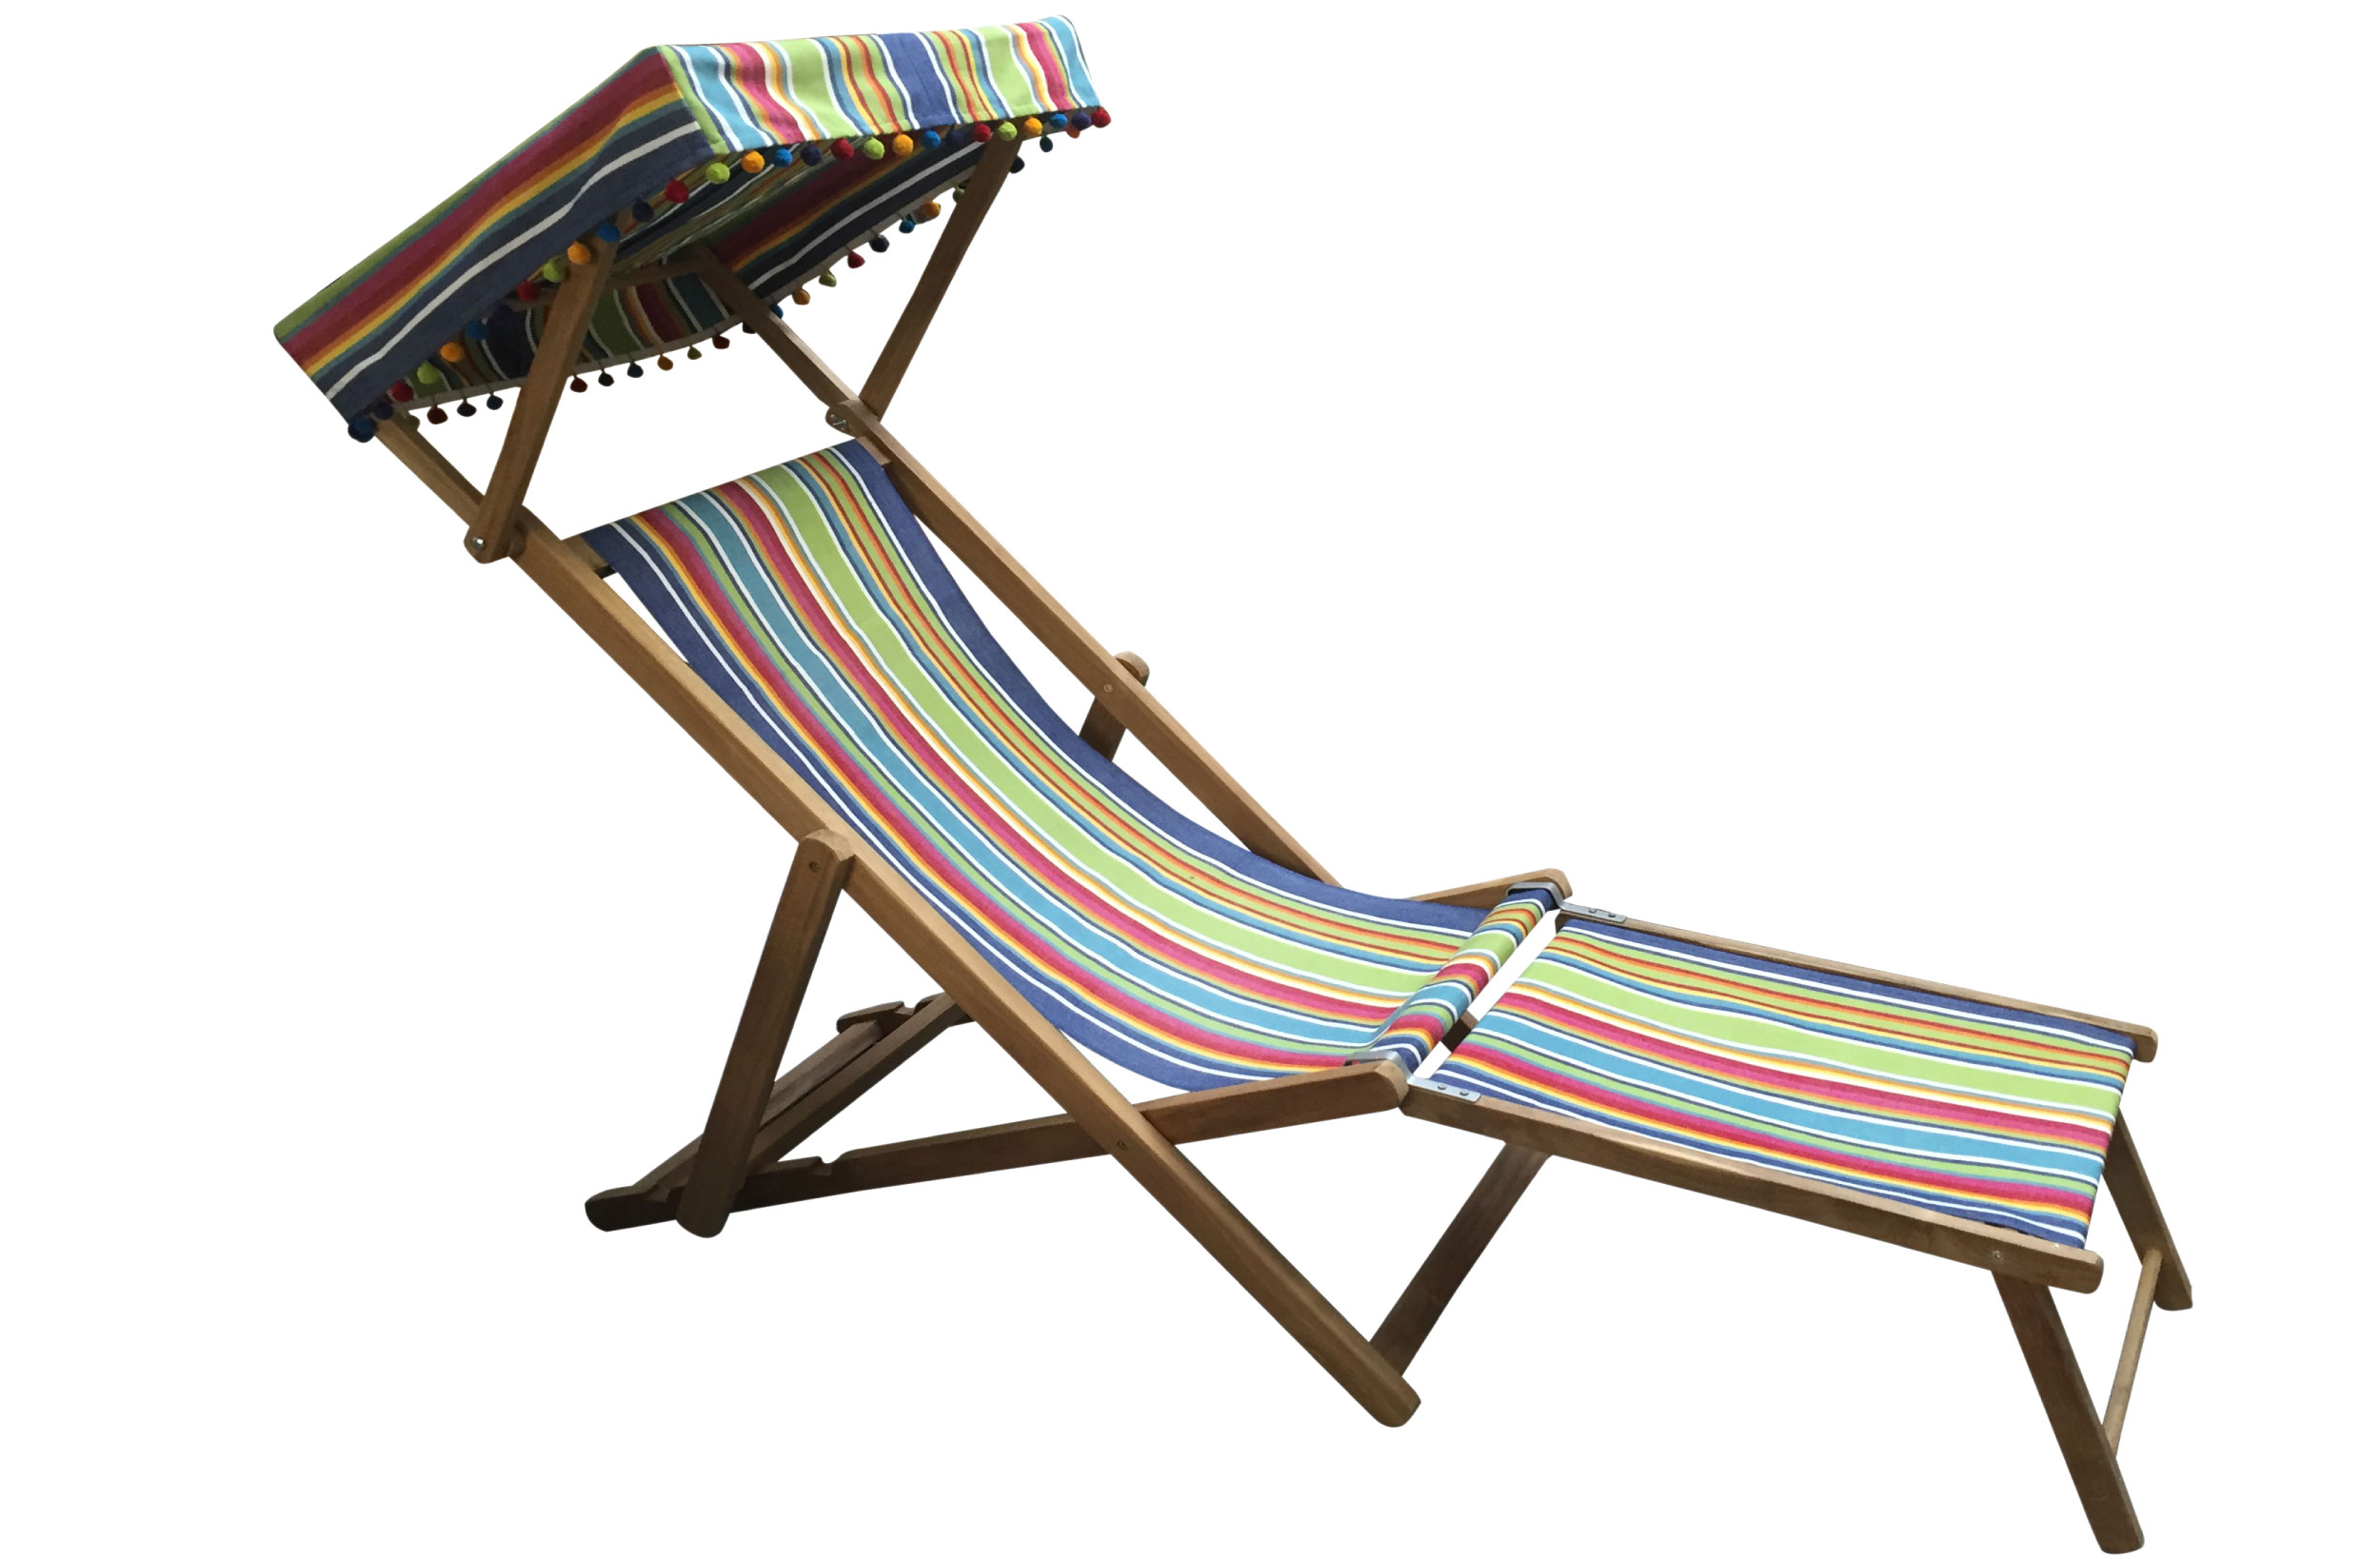 Blue, Green and Red stripe Edwardian Deckchair with Canopy and Footstool